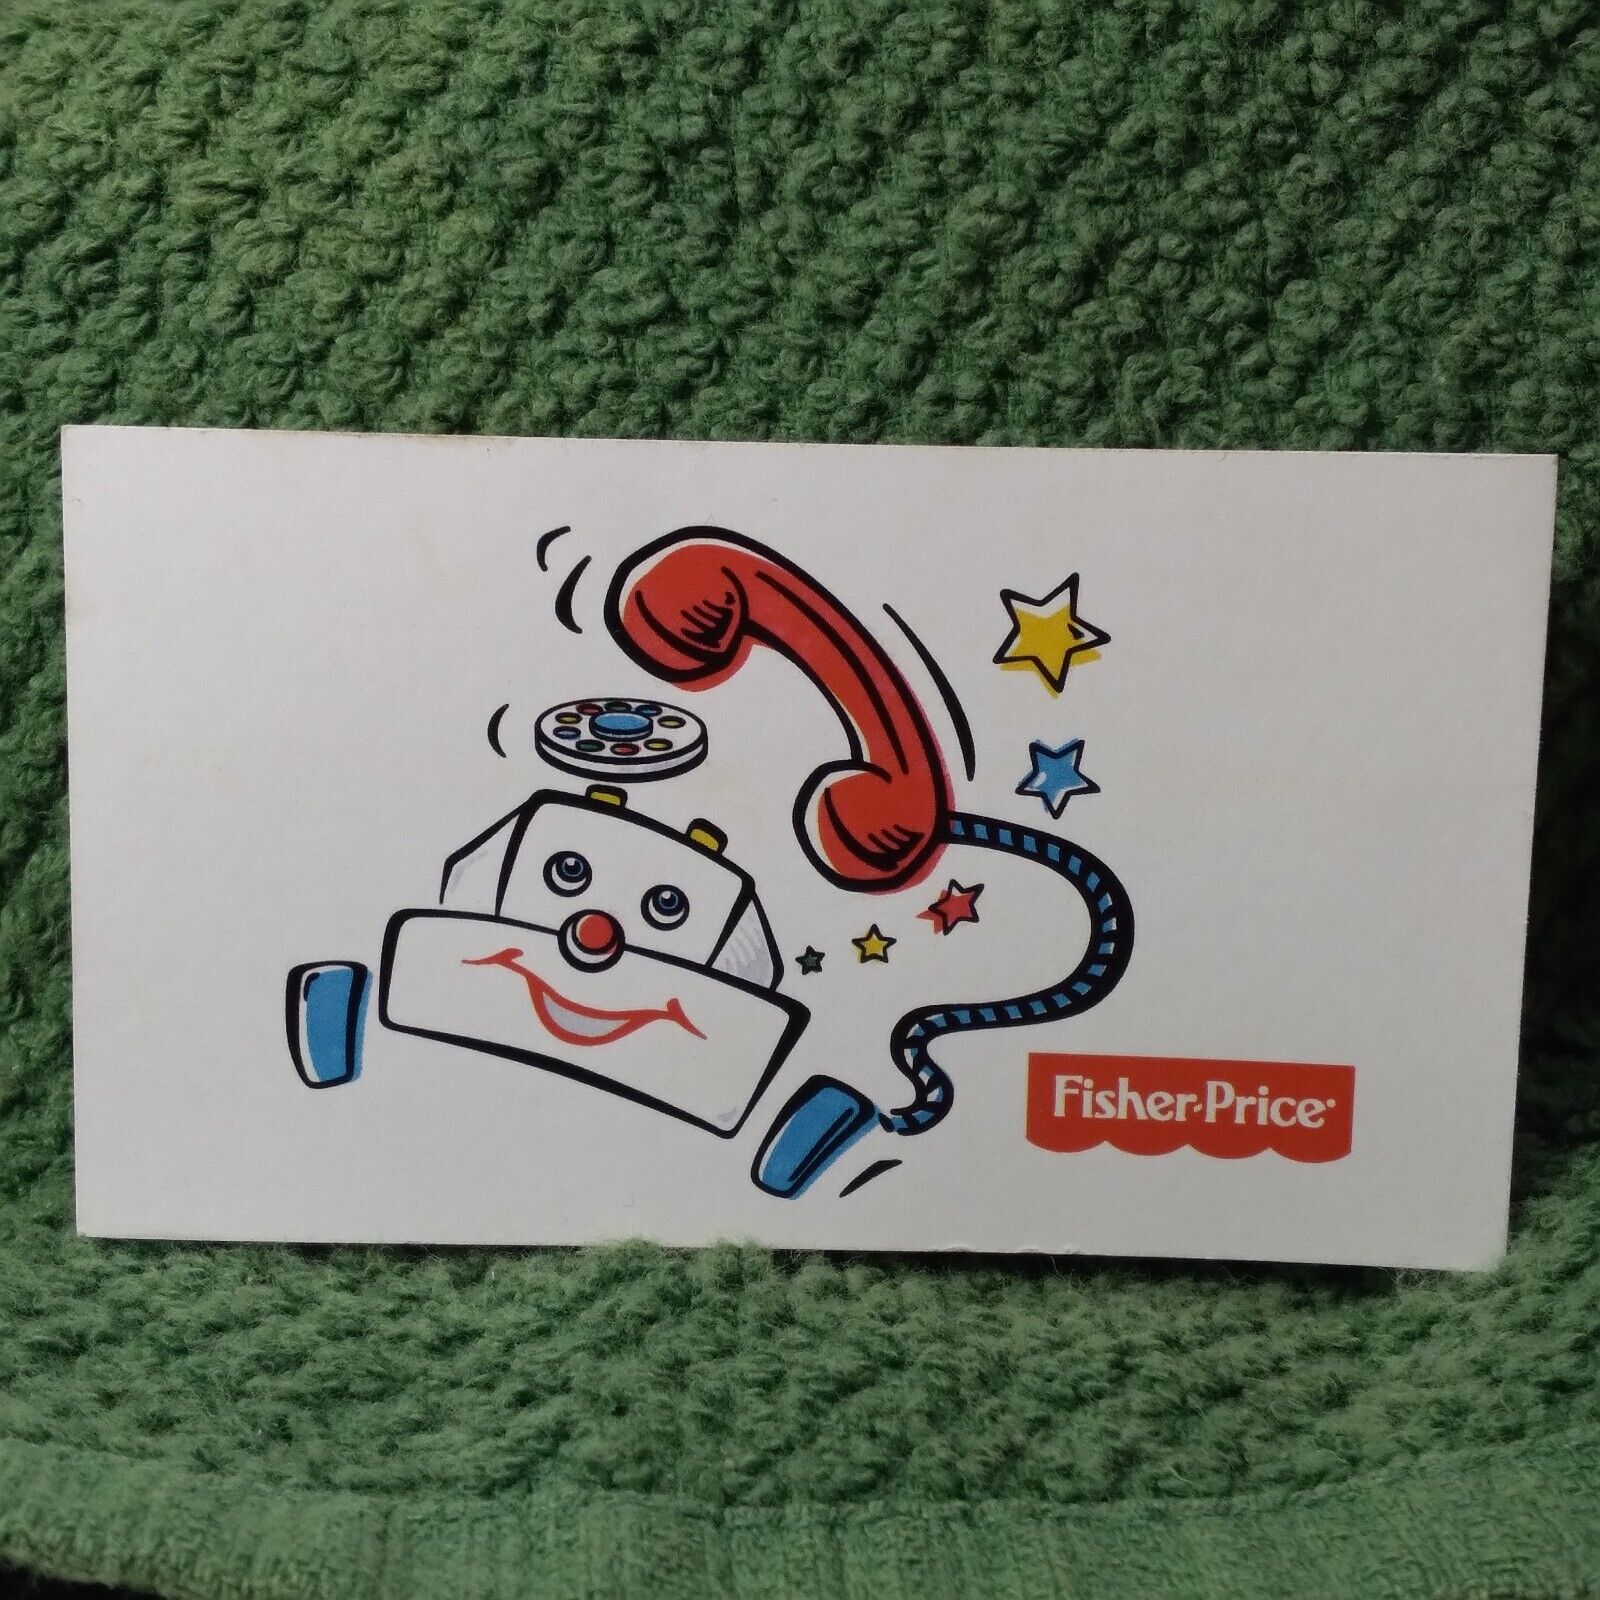 Mattel Fisher-Price Business Card